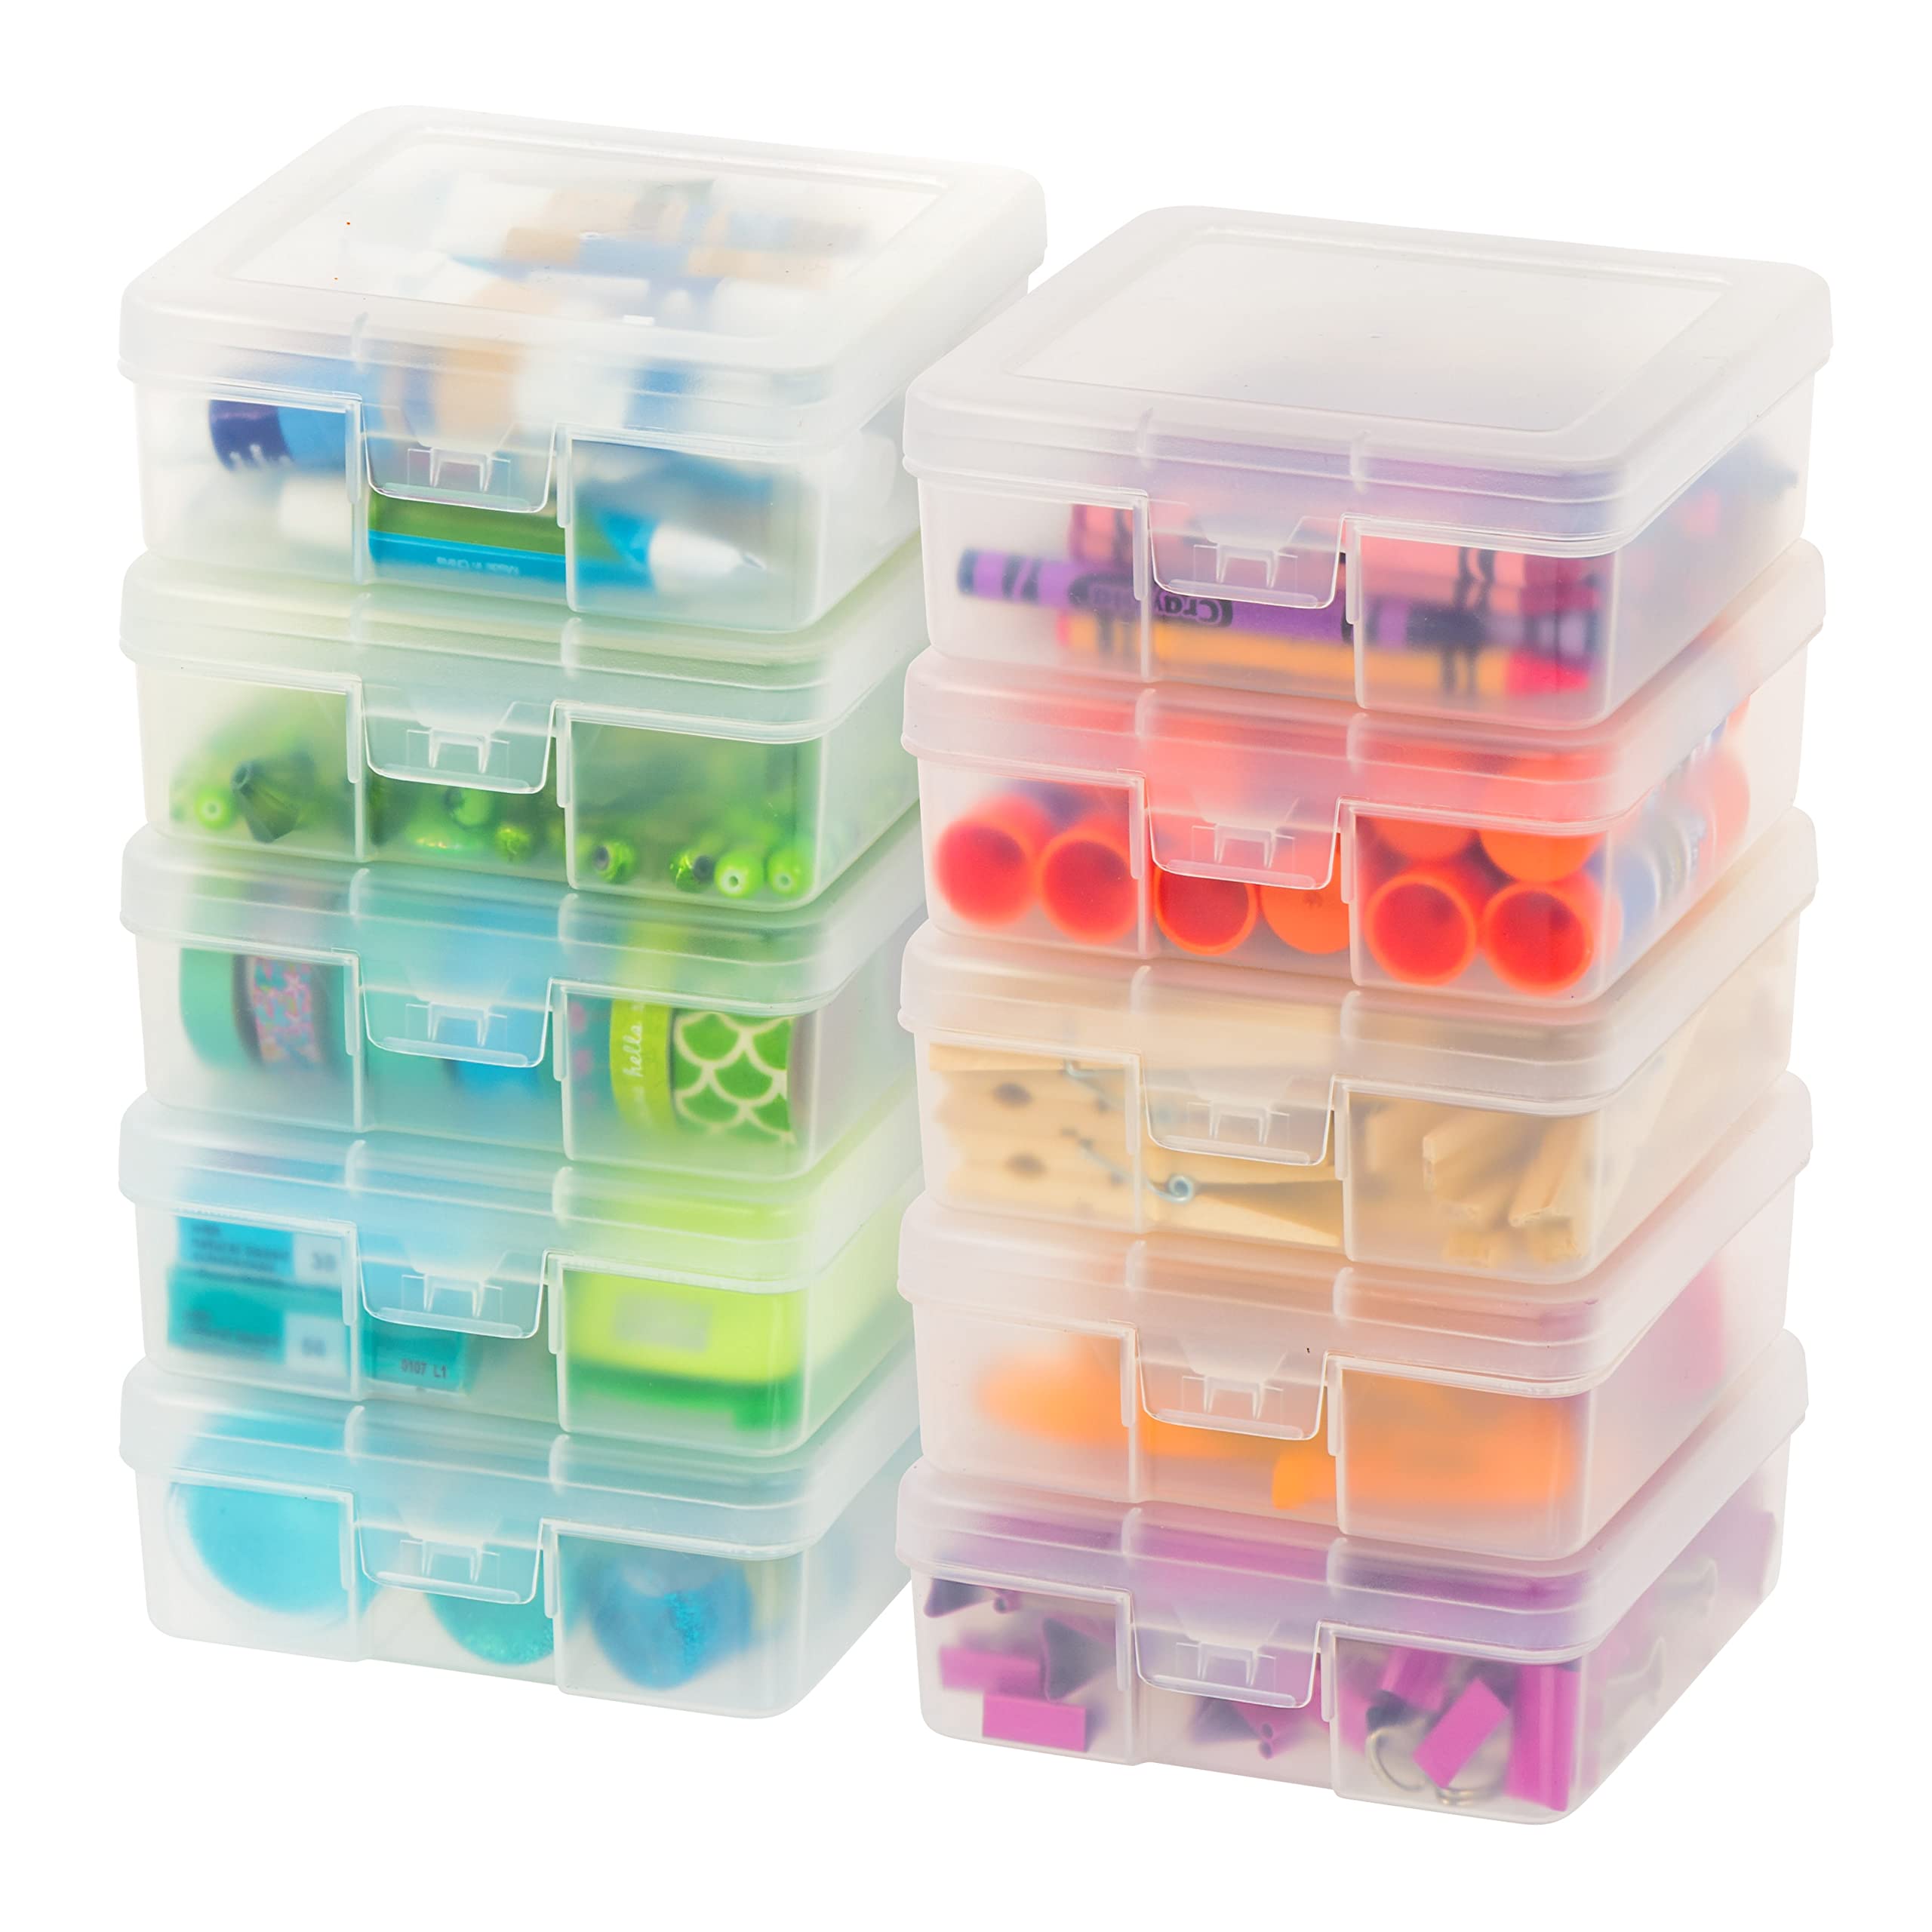 IRIS USA Small Plastic Hobby Art Craft Supply Organizer Storage Box with  Snap-Tight Closure Latch, 10 Pack, Art Satchel Storage Case for Ribbons,  Beads, Sticker, Yarn, and Ornaments, Stackable, Clear Small 